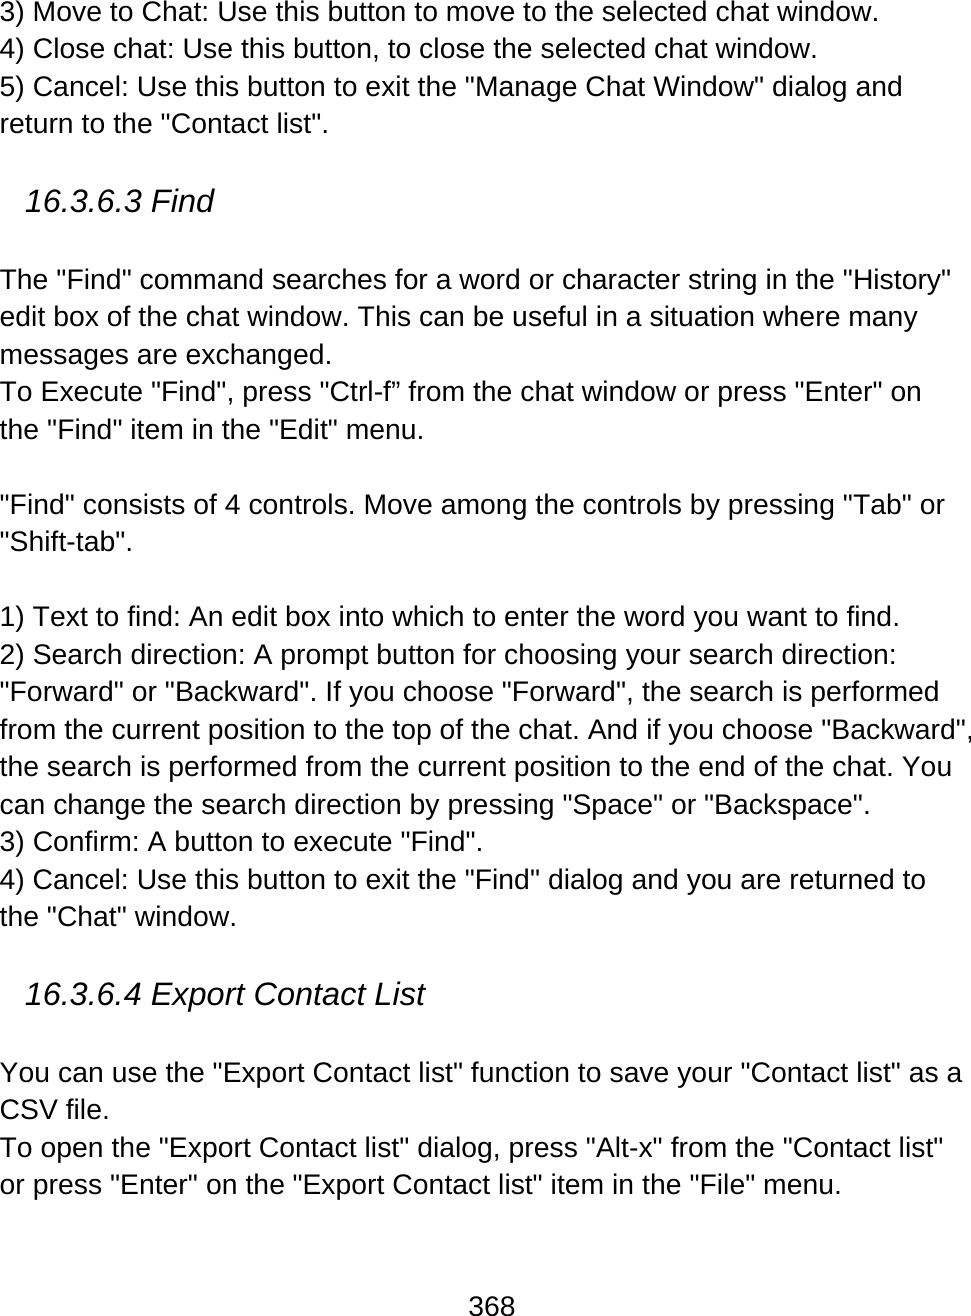 368  3) Move to Chat: Use this button to move to the selected chat window.  4) Close chat: Use this button, to close the selected chat window.  5) Cancel: Use this button to exit the &quot;Manage Chat Window&quot; dialog and return to the &quot;Contact list&quot;.  16.3.6.3 Find  The &quot;Find&quot; command searches for a word or character string in the &quot;History&quot; edit box of the chat window. This can be useful in a situation where many messages are exchanged.  To Execute &quot;Find&quot;, press &quot;Ctrl-f” from the chat window or press &quot;Enter&quot; on the &quot;Find&quot; item in the &quot;Edit&quot; menu.    &quot;Find&quot; consists of 4 controls. Move among the controls by pressing &quot;Tab&quot; or &quot;Shift-tab&quot;.  1) Text to find: An edit box into which to enter the word you want to find. 2) Search direction: A prompt button for choosing your search direction: &quot;Forward&quot; or &quot;Backward&quot;. If you choose &quot;Forward&quot;, the search is performed from the current position to the top of the chat. And if you choose &quot;Backward&quot;, the search is performed from the current position to the end of the chat. You can change the search direction by pressing &quot;Space&quot; or &quot;Backspace&quot;.  3) Confirm: A button to execute &quot;Find&quot;. 4) Cancel: Use this button to exit the &quot;Find&quot; dialog and you are returned to the &quot;Chat&quot; window.    16.3.6.4 Export Contact List   You can use the &quot;Export Contact list&quot; function to save your &quot;Contact list&quot; as a CSV file. To open the &quot;Export Contact list&quot; dialog, press &quot;Alt-x&quot; from the &quot;Contact list&quot; or press &quot;Enter&quot; on the &quot;Export Contact list&quot; item in the &quot;File&quot; menu.    